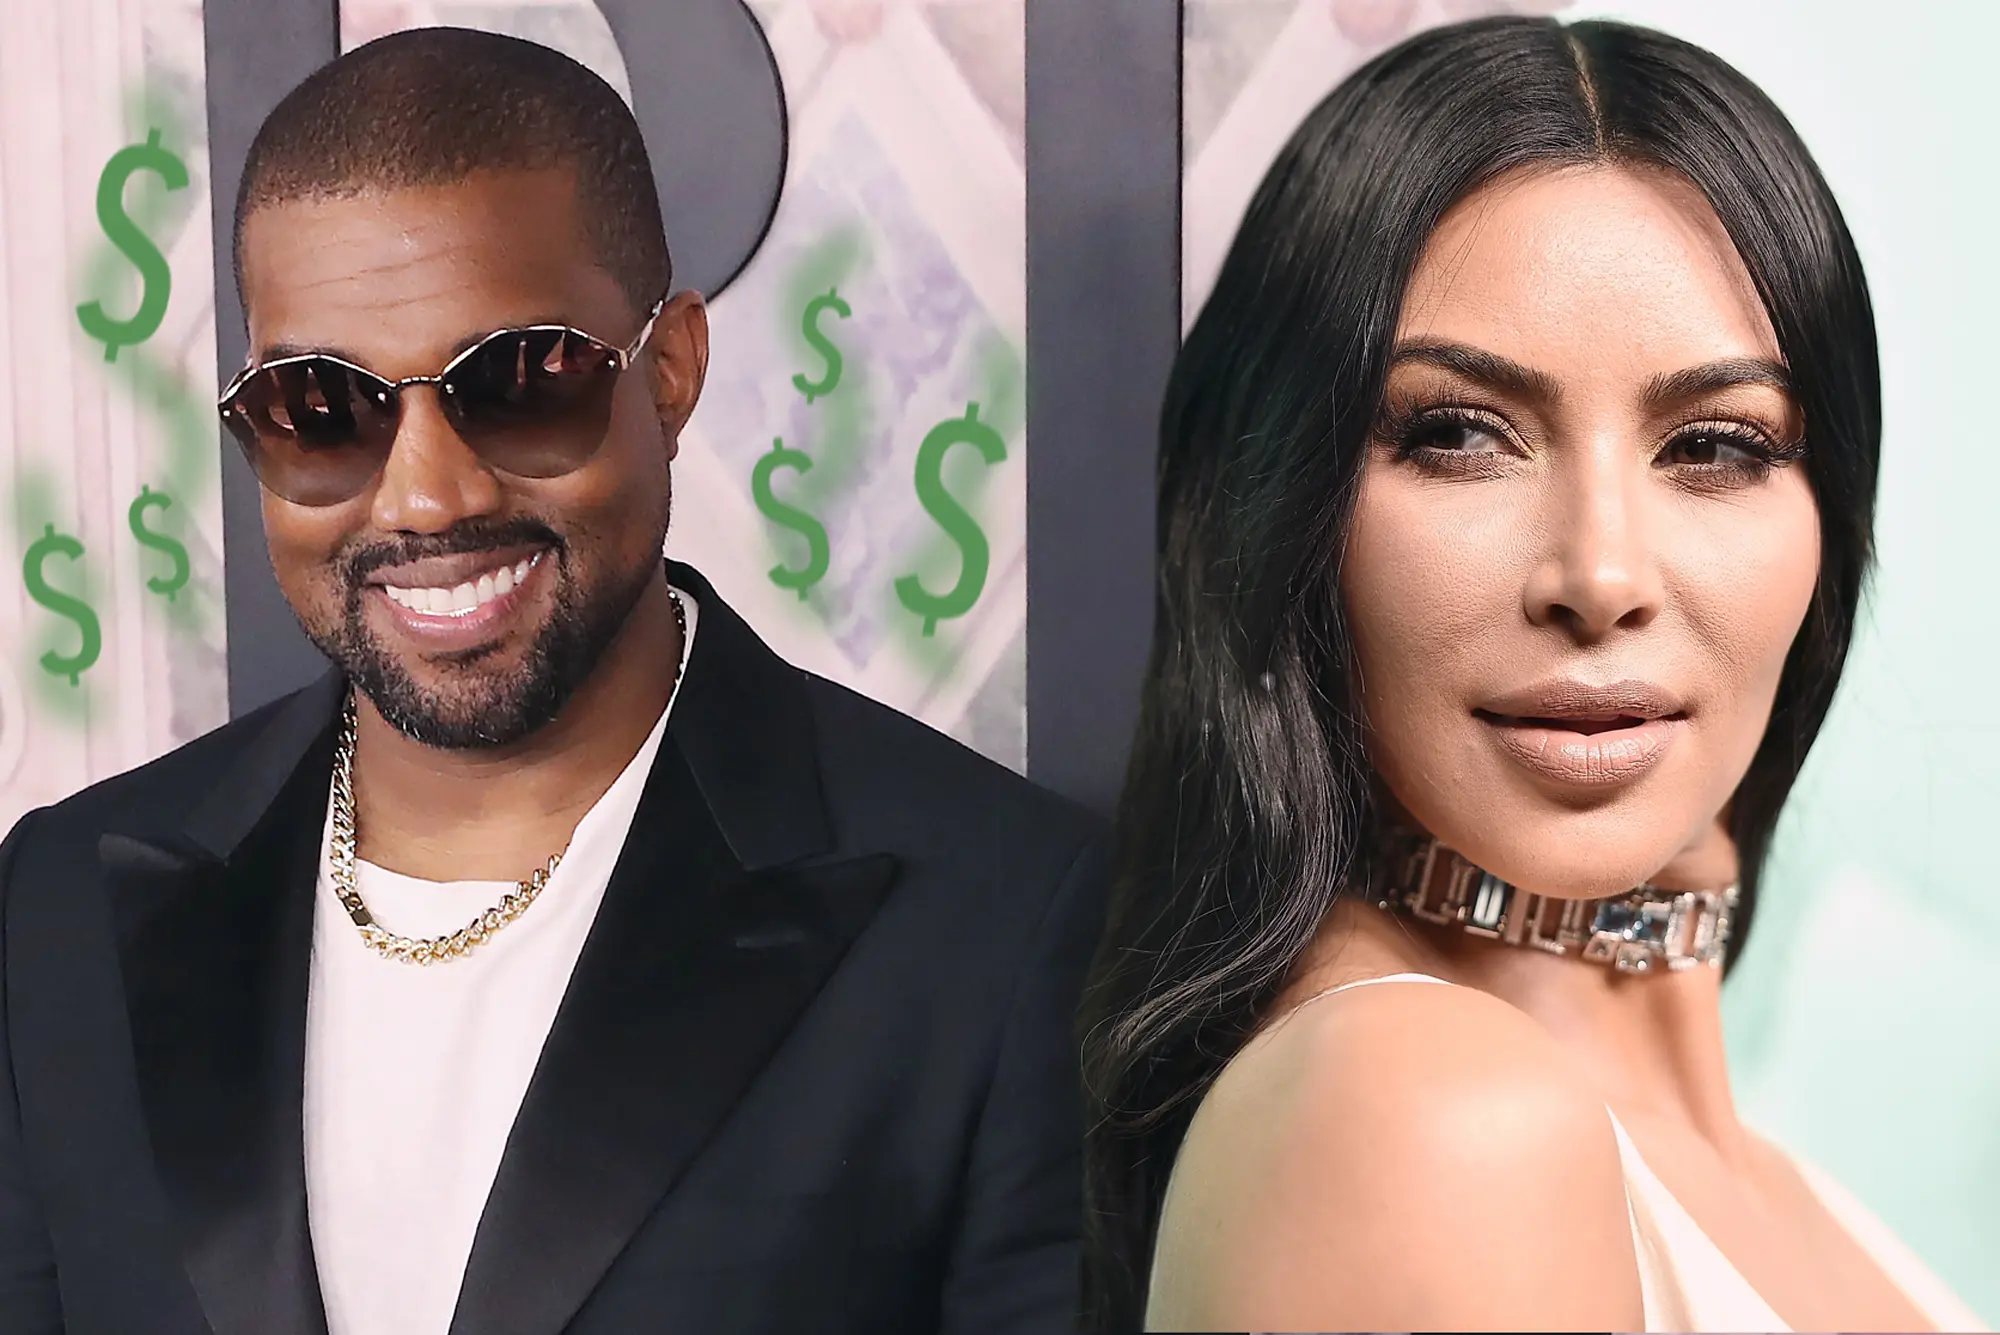 After calling her home to God, Kanye West sends his ex-wife Kim Kardashian with Tom Brady

+2023